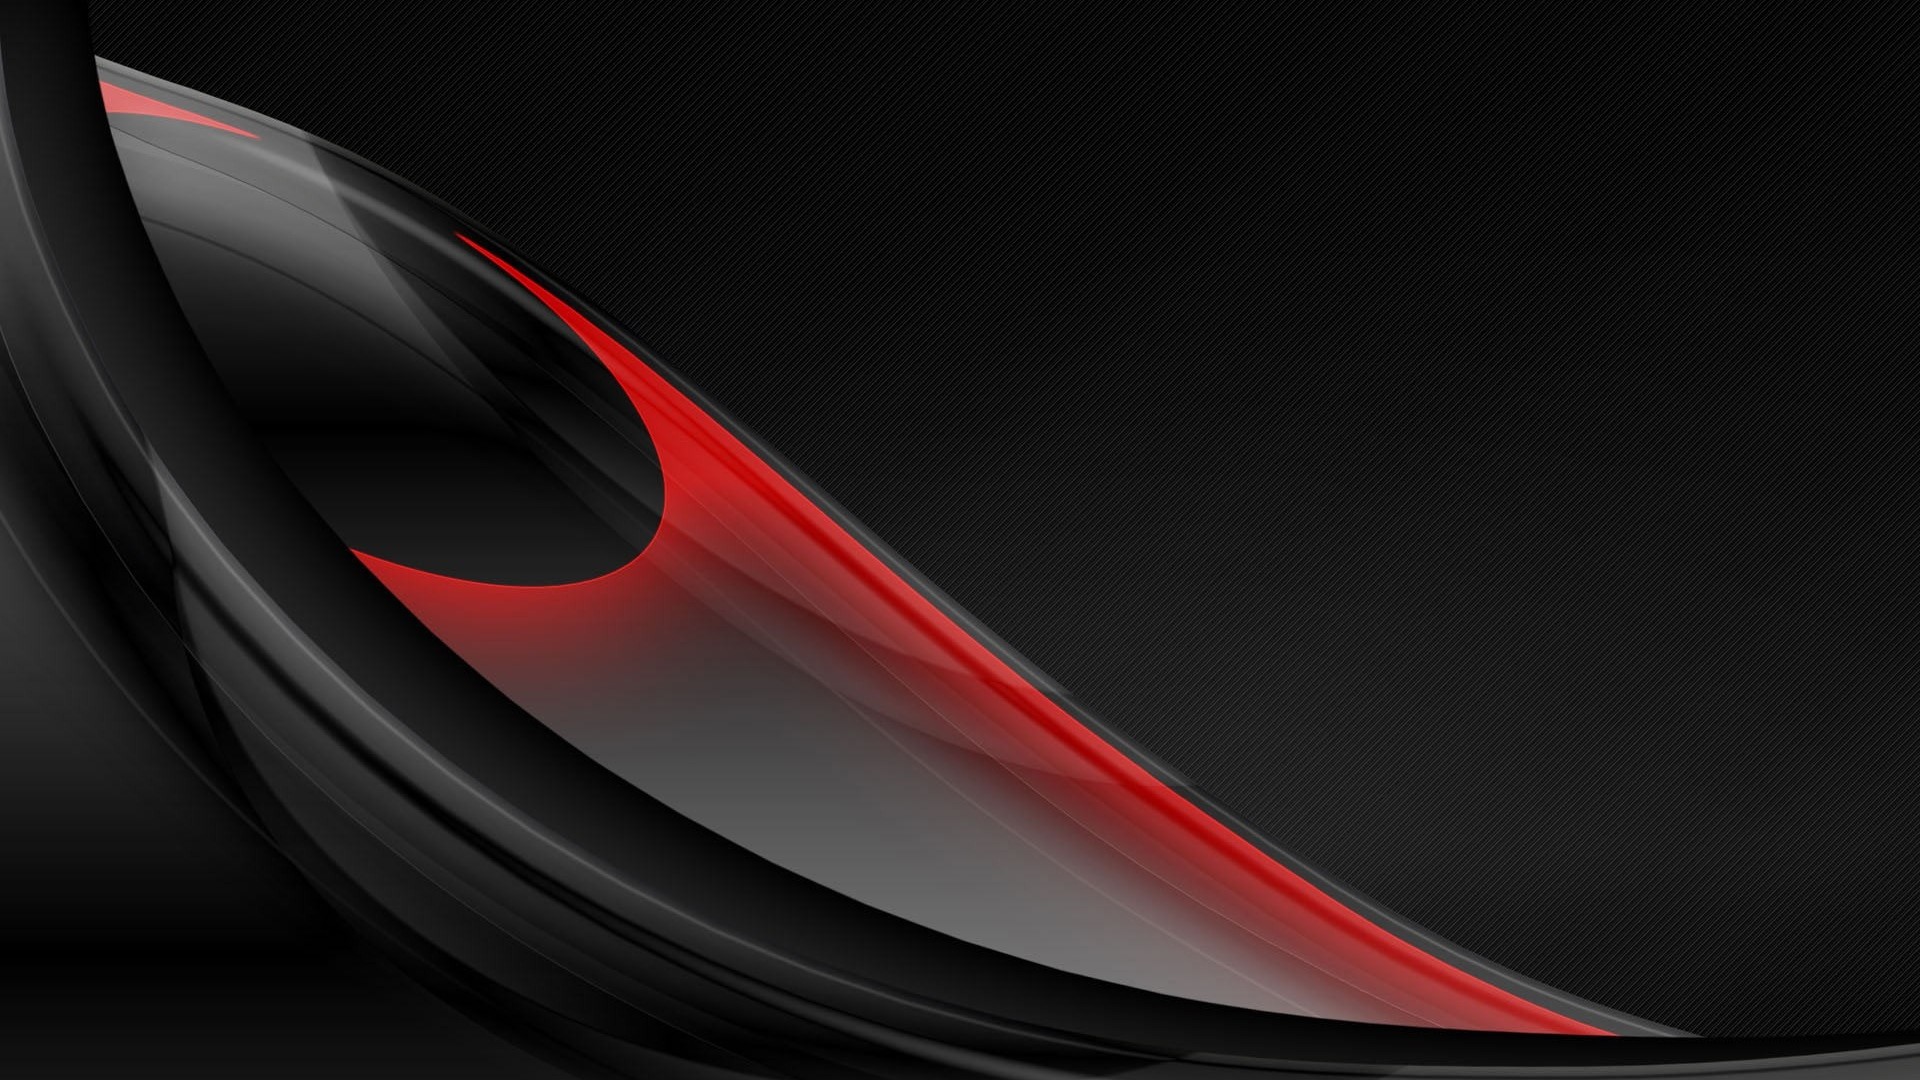 73+ Black and Red Wallpaper 1920×1080